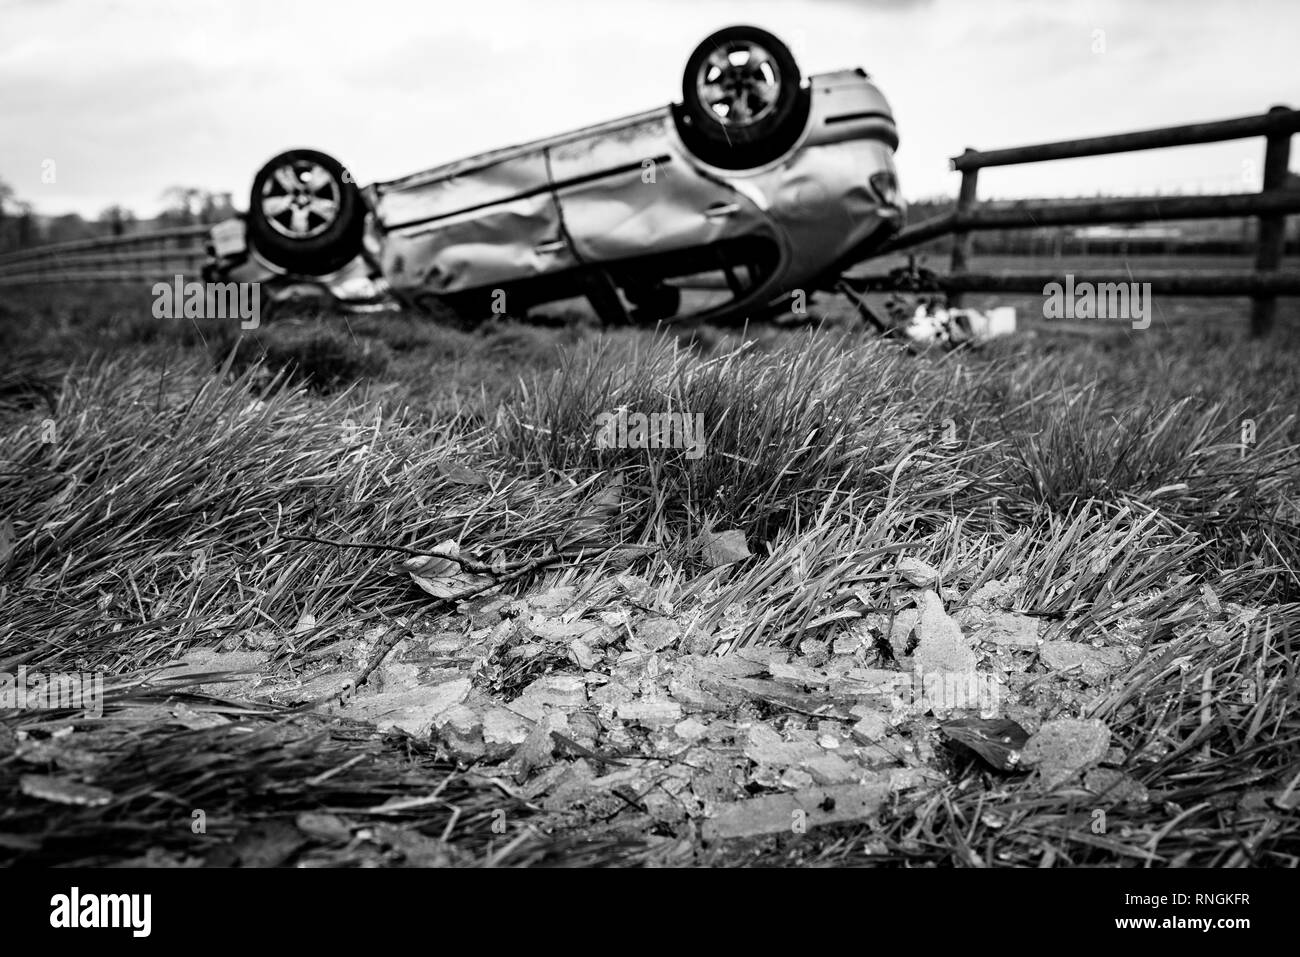 Car Crash and Car Damage. Vehicle upside down in a field surrounded by broken glass and debris after a high speed crash. Stock Photo